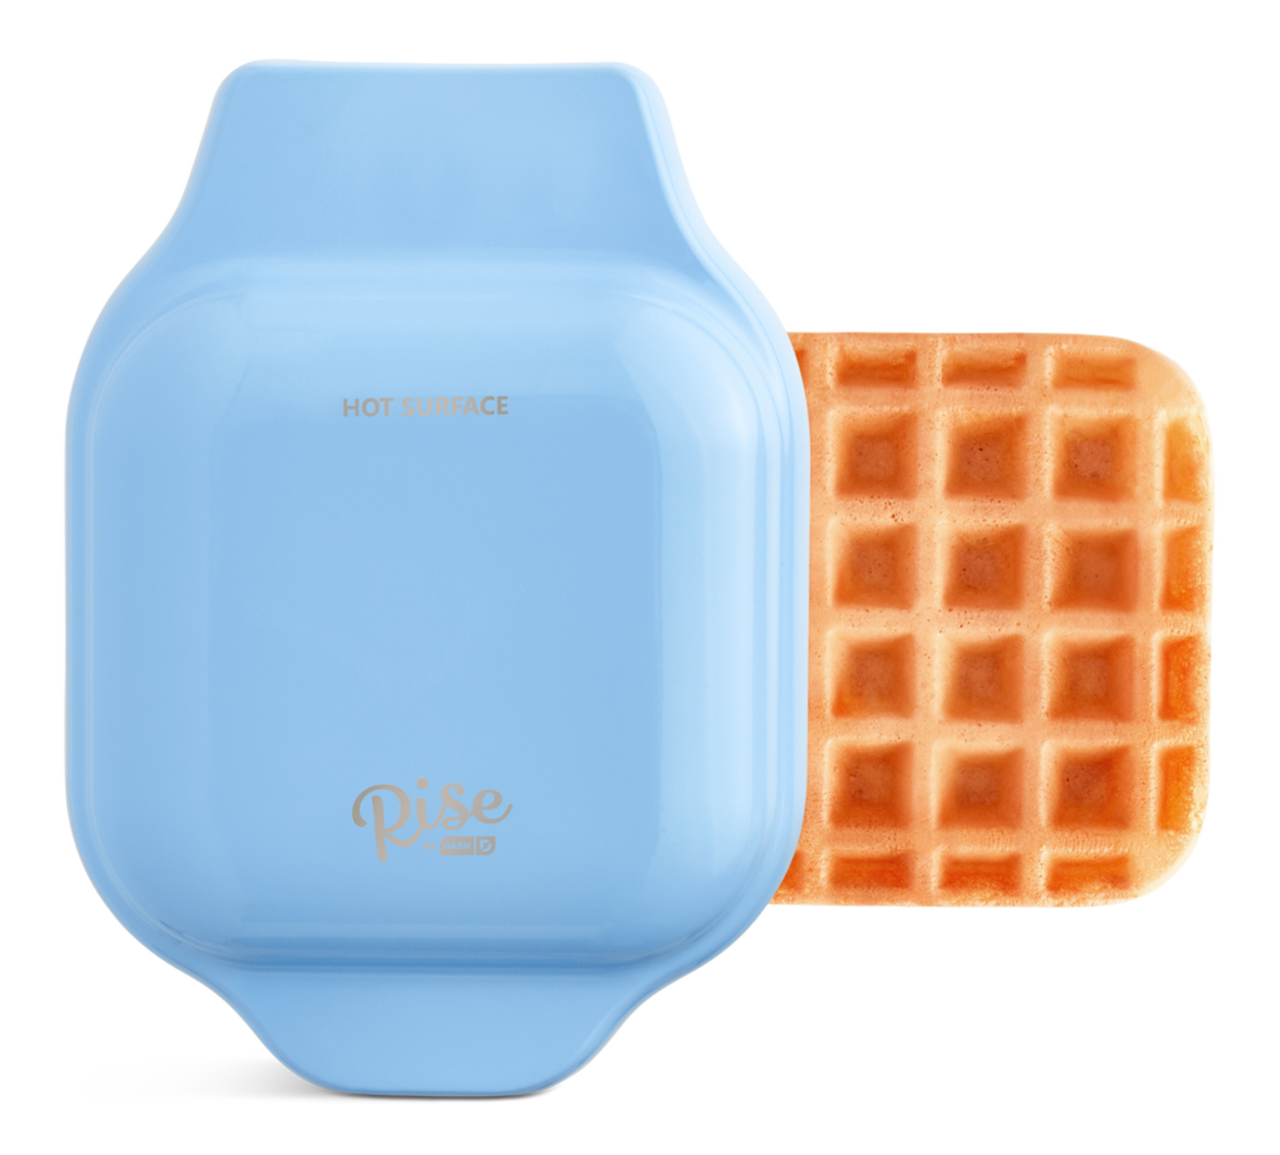 https://media-www.canadiantire.ca/product/living/kitchen/kitchen-appliances/0437058/rise-by-dash-mini-waffle-maker-50be8cd1-874a-473c-84ca-e7a4fba6adf9.png?imdensity=1&imwidth=640&impolicy=mZoom